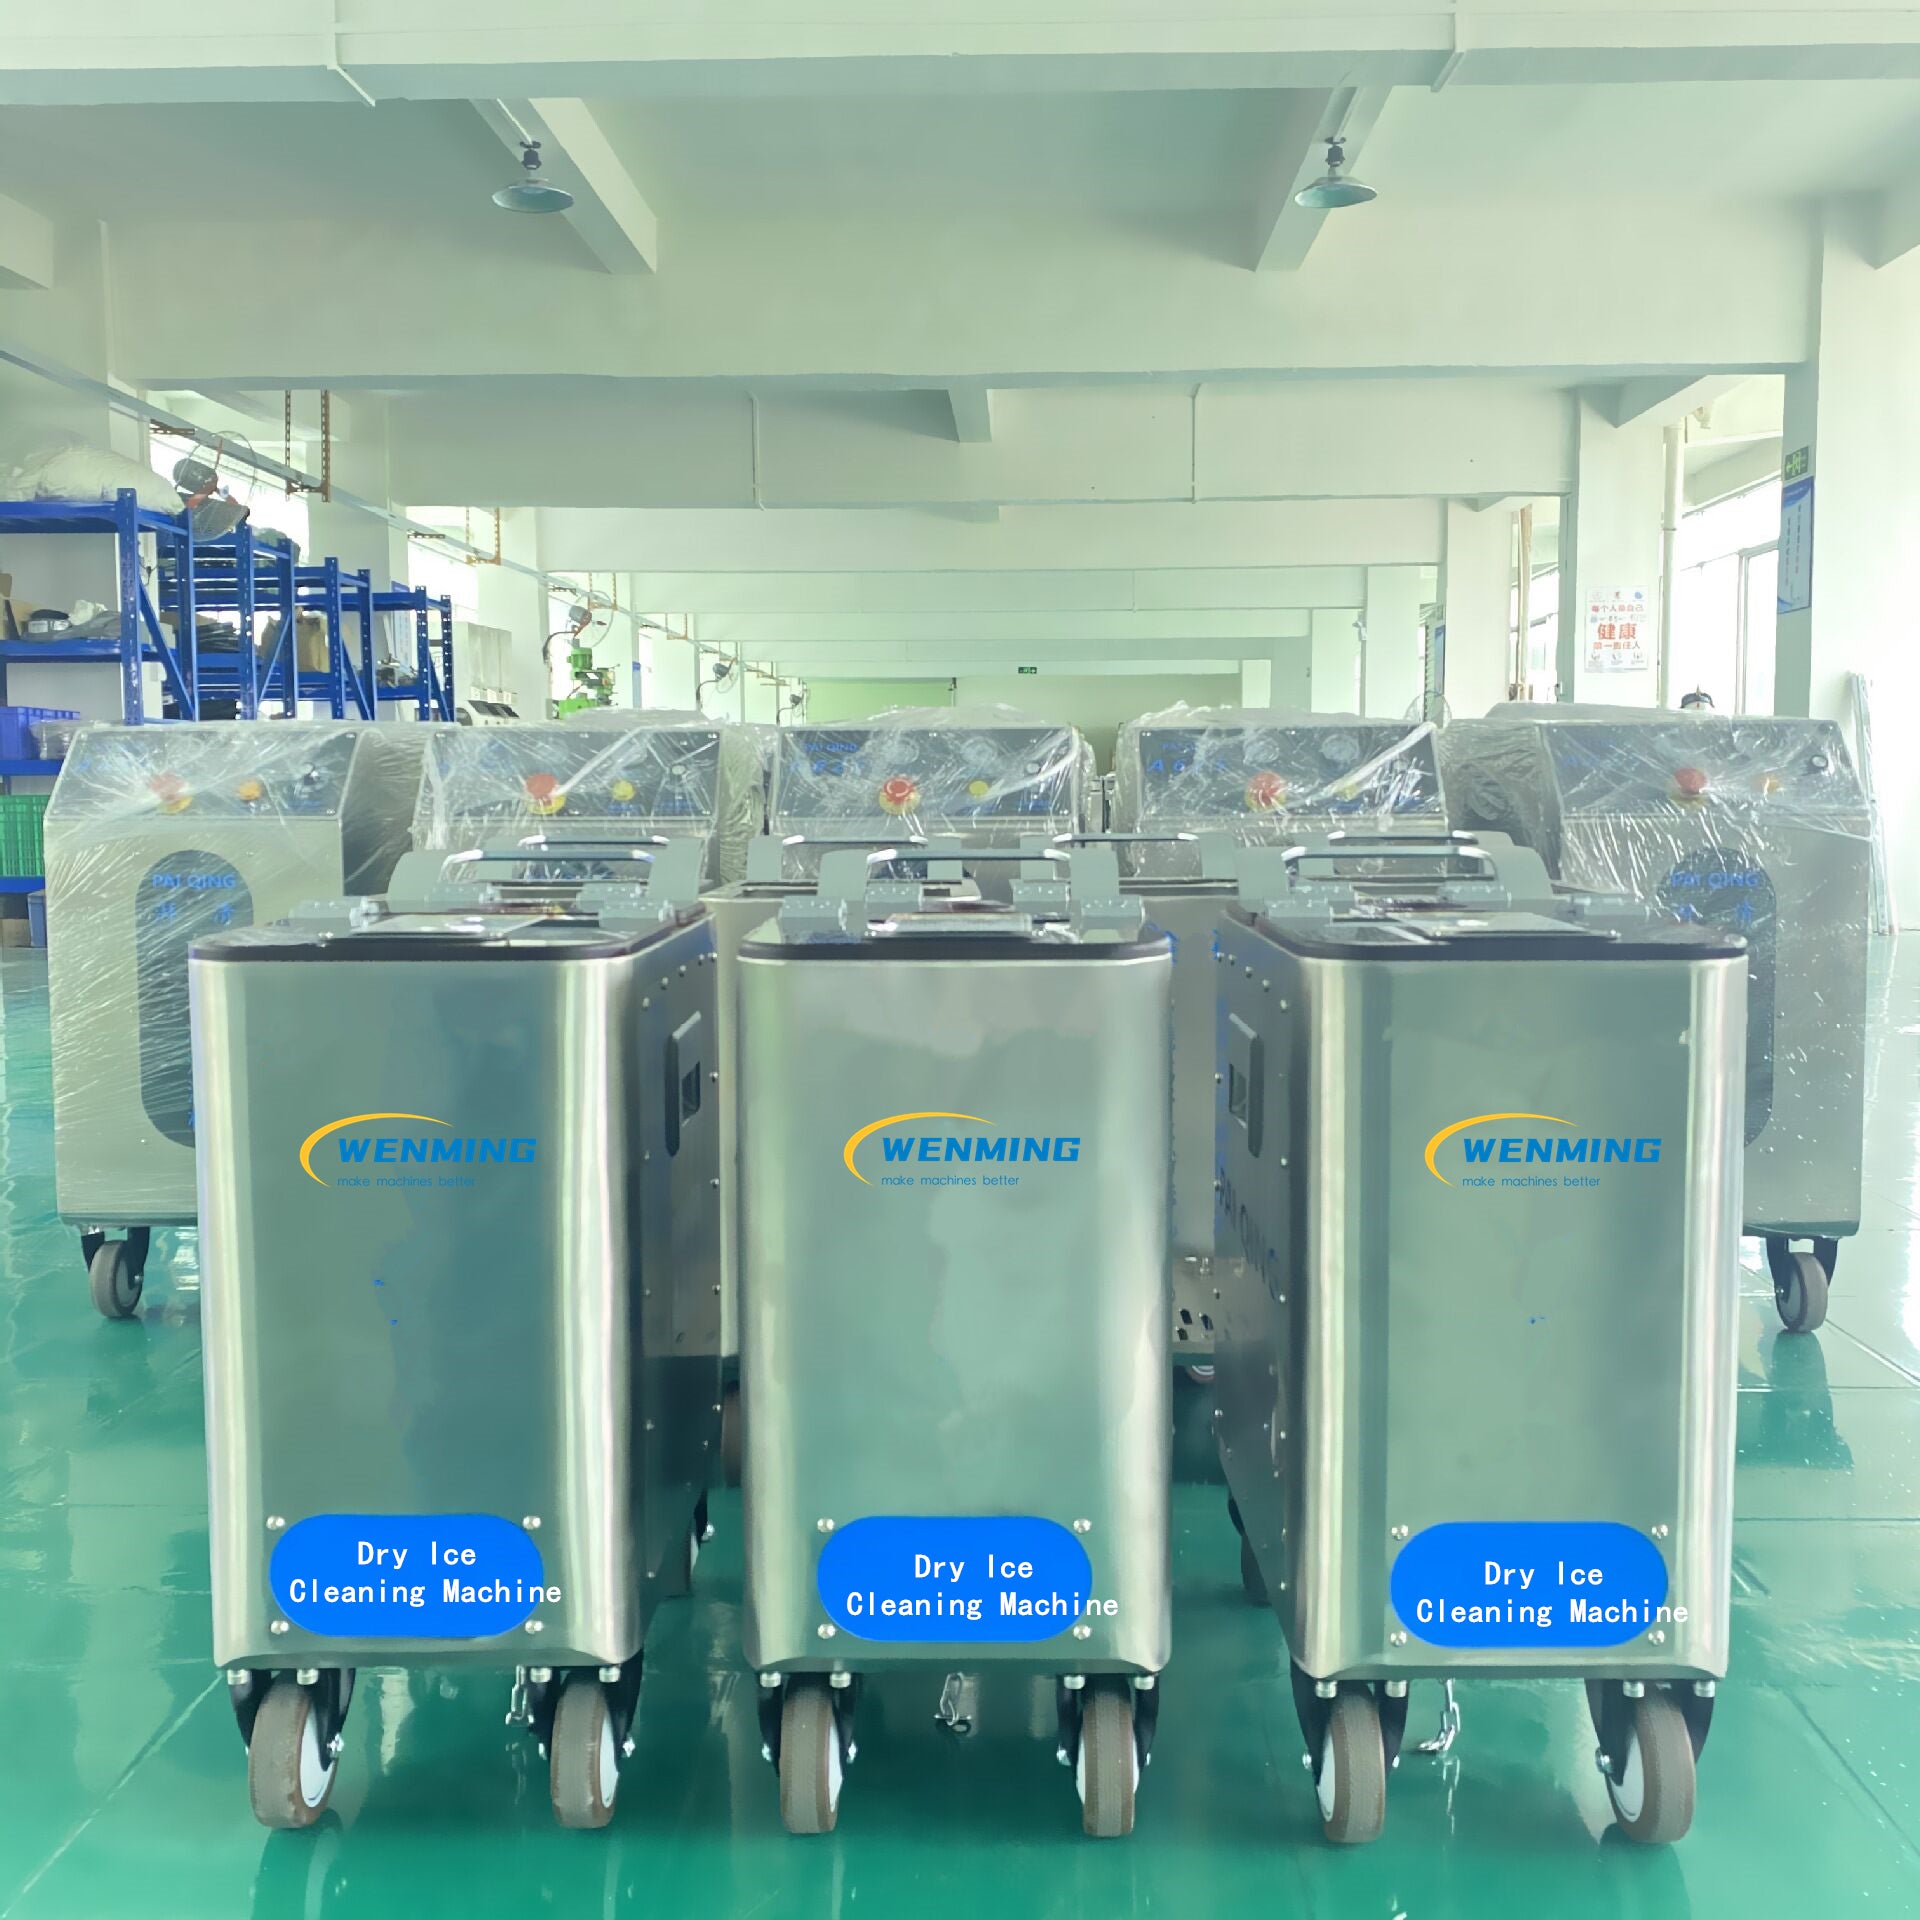 Dry-Ice-Cleaning-Machine-in-stock